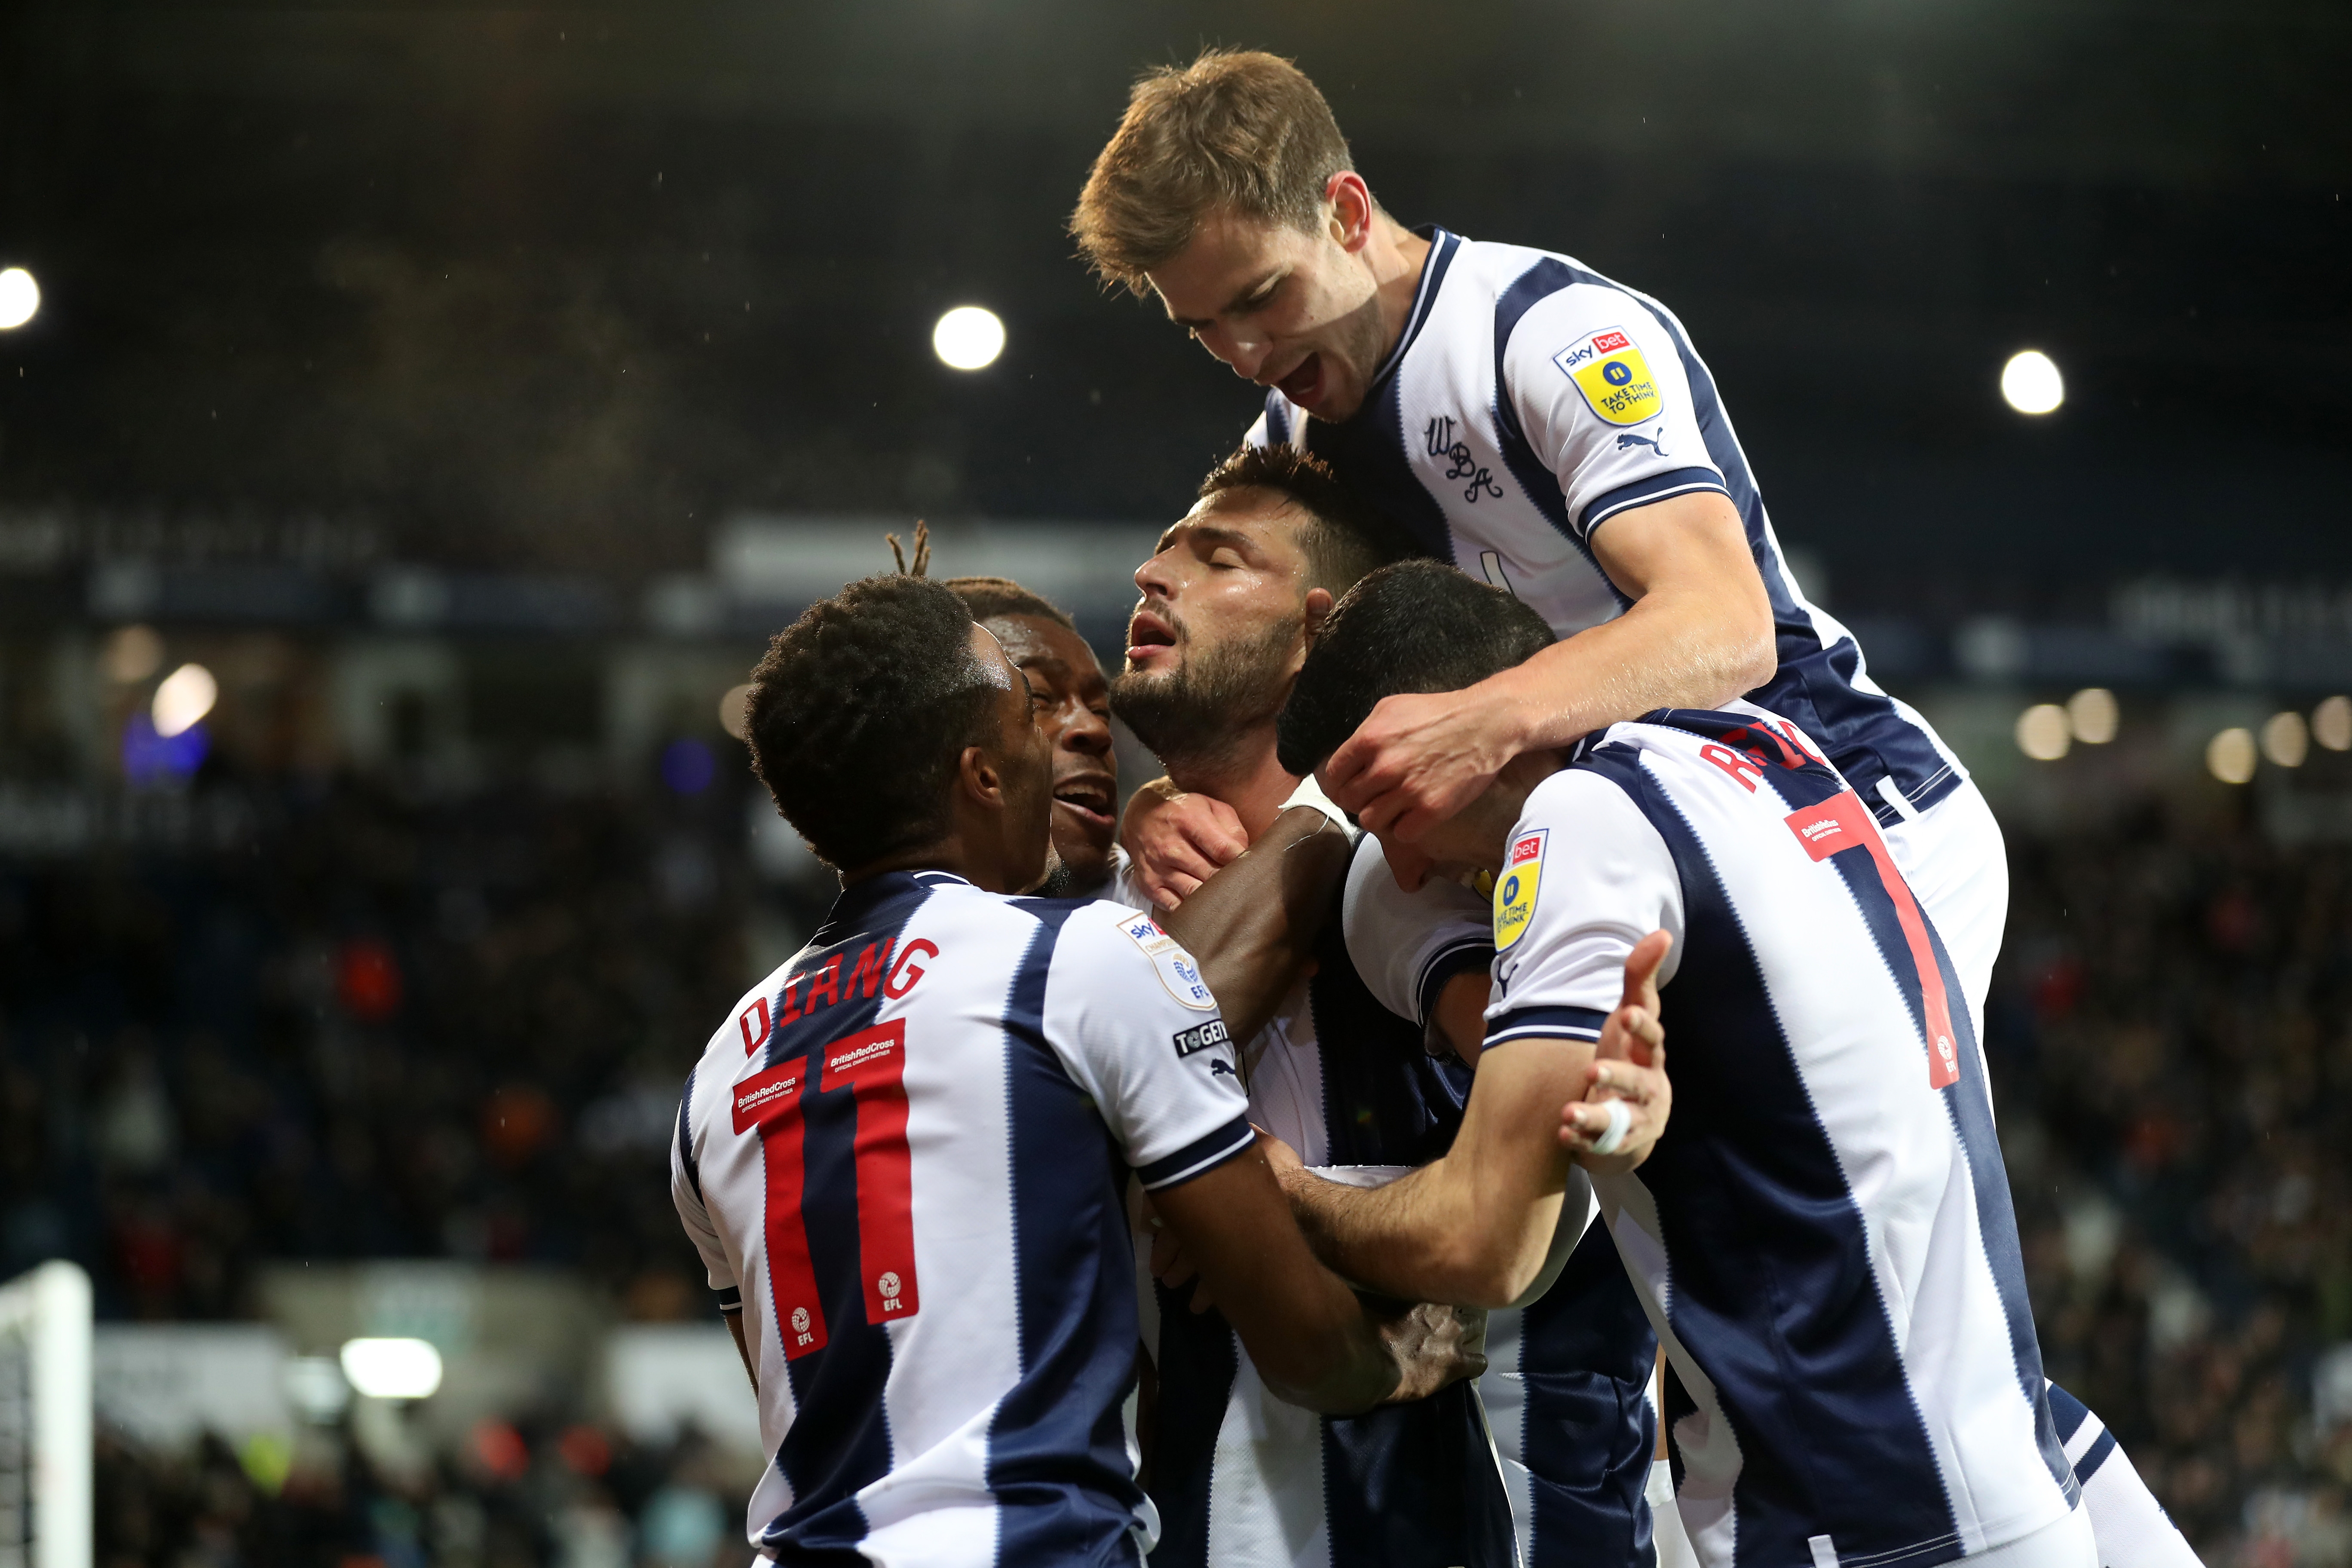 Albion players celebrate against Blackpool.